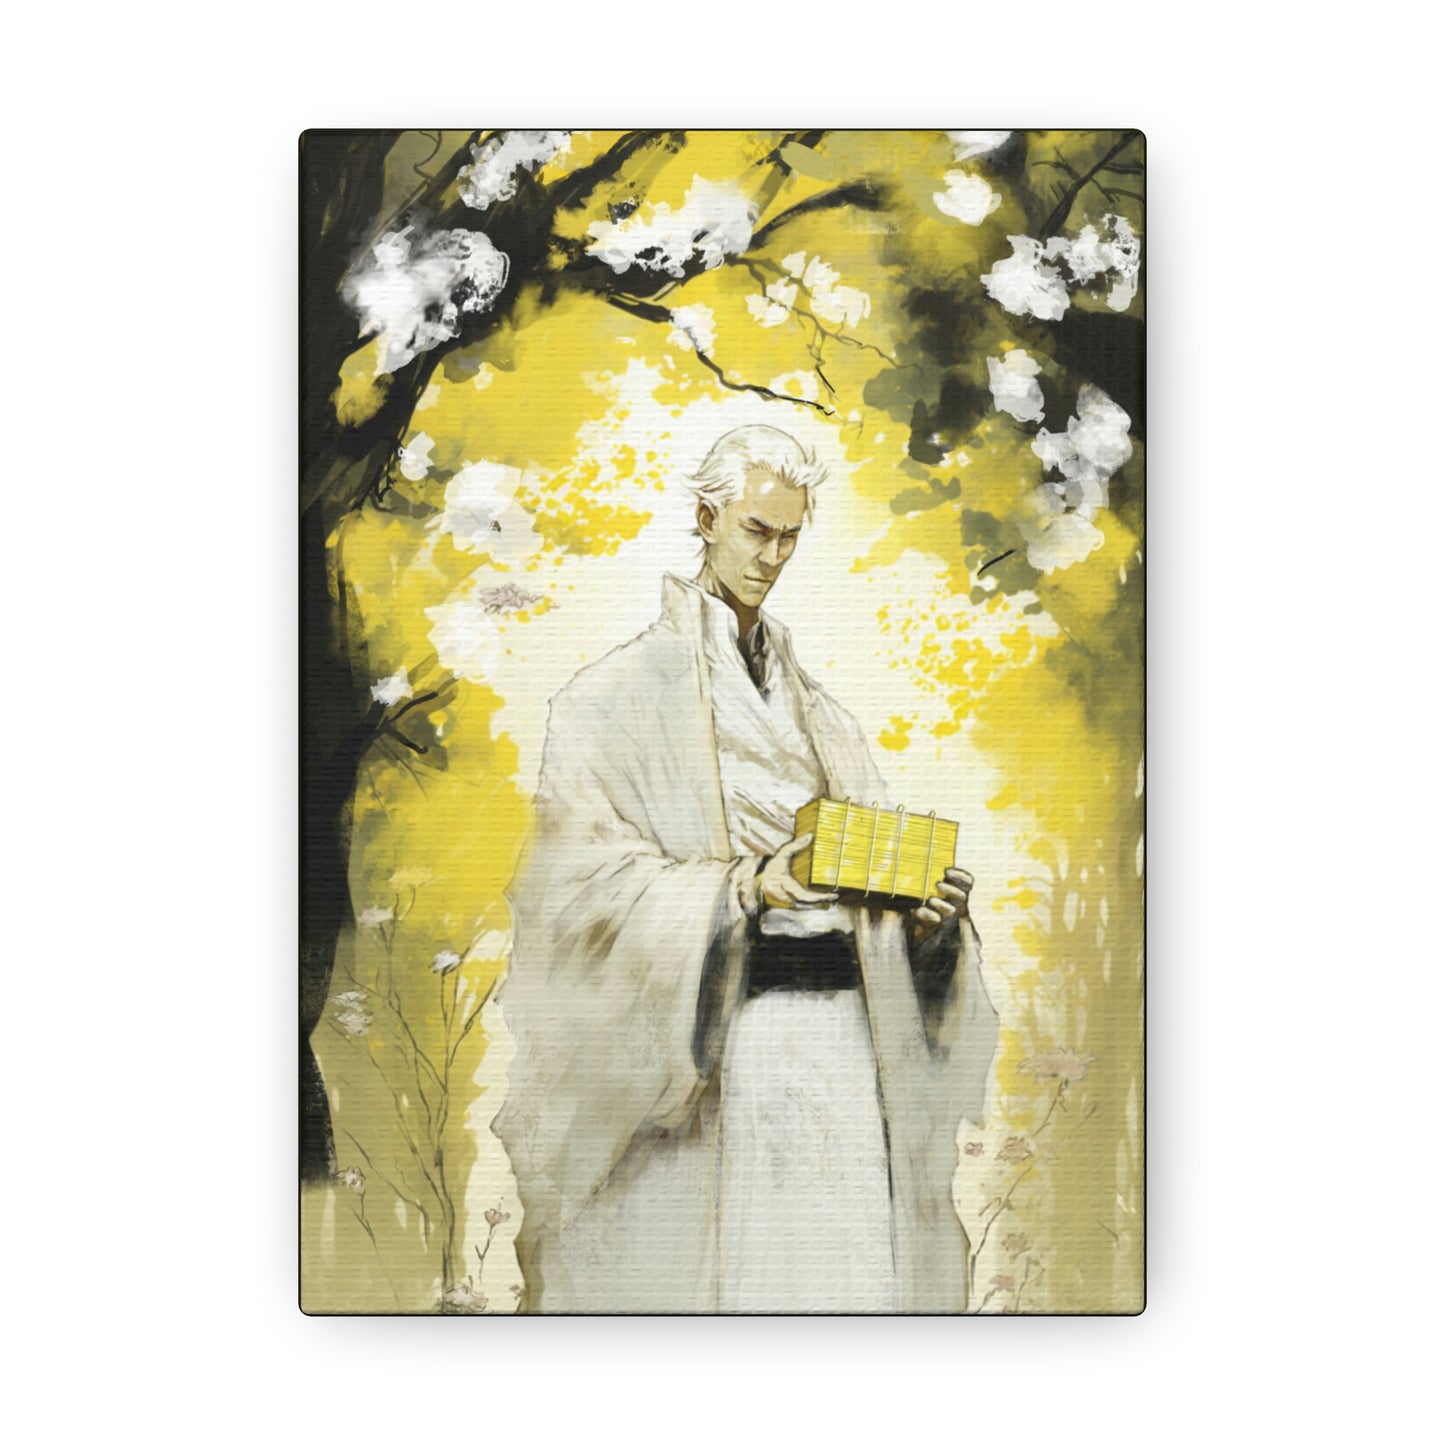 Art of the Restoration - Moroni Delivers the Plates - Canvas Gallery Wrap Print